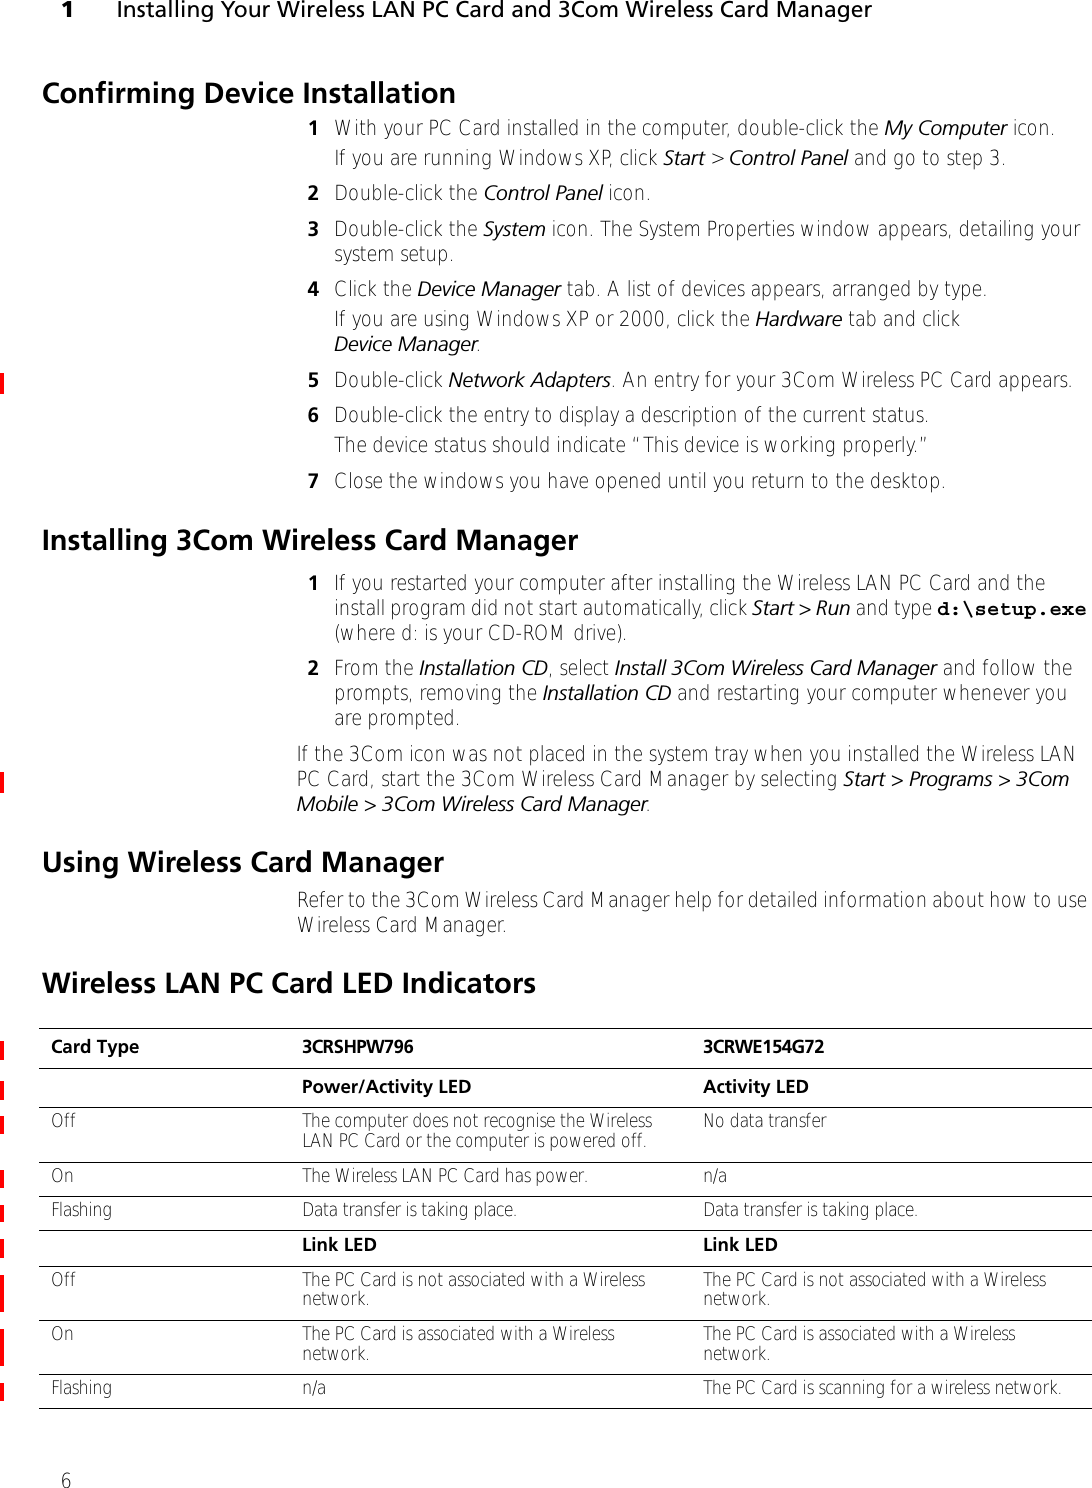 1Installing Your Wireless LAN PC Card and 3Com Wireless Card Manager6Confirming Device Installation1With your PC Card installed in the computer, double-click the My Computer icon. If you are running Windows XP, click Start &gt; Control Panel and go to step 3. 2Double-click the Control Panel icon.3Double-click the System icon. The System Properties window appears, detailing your system setup.4Click the Device Manager tab. A list of devices appears, arranged by type.If you are using Windows XP or 2000, click the Hardware tab and click Device Manager. 5Double-click Network Adapters. An entry for your 3Com Wireless PC Card appears.6Double-click the entry to display a description of the current status. The device status should indicate “This device is working properly.”7Close the windows you have opened until you return to the desktop.Installing 3Com Wireless Card Manager1If you restarted your computer after installing the Wireless LAN PC Card and the install program did not start automatically, click Start &gt; Run and type d:\setup.exe (where d: is your CD-ROM drive).2From the Installation CD, select Install 3Com Wireless Card Manager and follow the prompts, removing the Installation CD and restarting your computer whenever you are prompted. If the 3Com icon was not placed in the system tray when you installed the Wireless LAN PC Card, start the 3Com Wireless Card Manager by selecting Start &gt; Programs &gt; 3Com Mobile &gt; 3Com Wireless Card Manager. Using Wireless Card ManagerRefer to the 3Com Wireless Card Manager help for detailed information about how to use Wireless Card Manager.Wireless LAN PC Card LED IndicatorsCard Type 3CRSHPW796 3CRWE154G72Power/Activity LED Activity LEDOff The computer does not recognise the Wireless LAN PC Card or the computer is powered off. No data transferOn The Wireless LAN PC Card has power.  n/aFlashing Data transfer is taking place. Data transfer is taking place.Link LED Link LEDOff The PC Card is not associated with a Wireless network. The PC Card is not associated with a Wireless network.On The PC Card is associated with a Wireless network. The PC Card is associated with a Wireless network.Flashing n/a The PC Card is scanning for a wireless network.